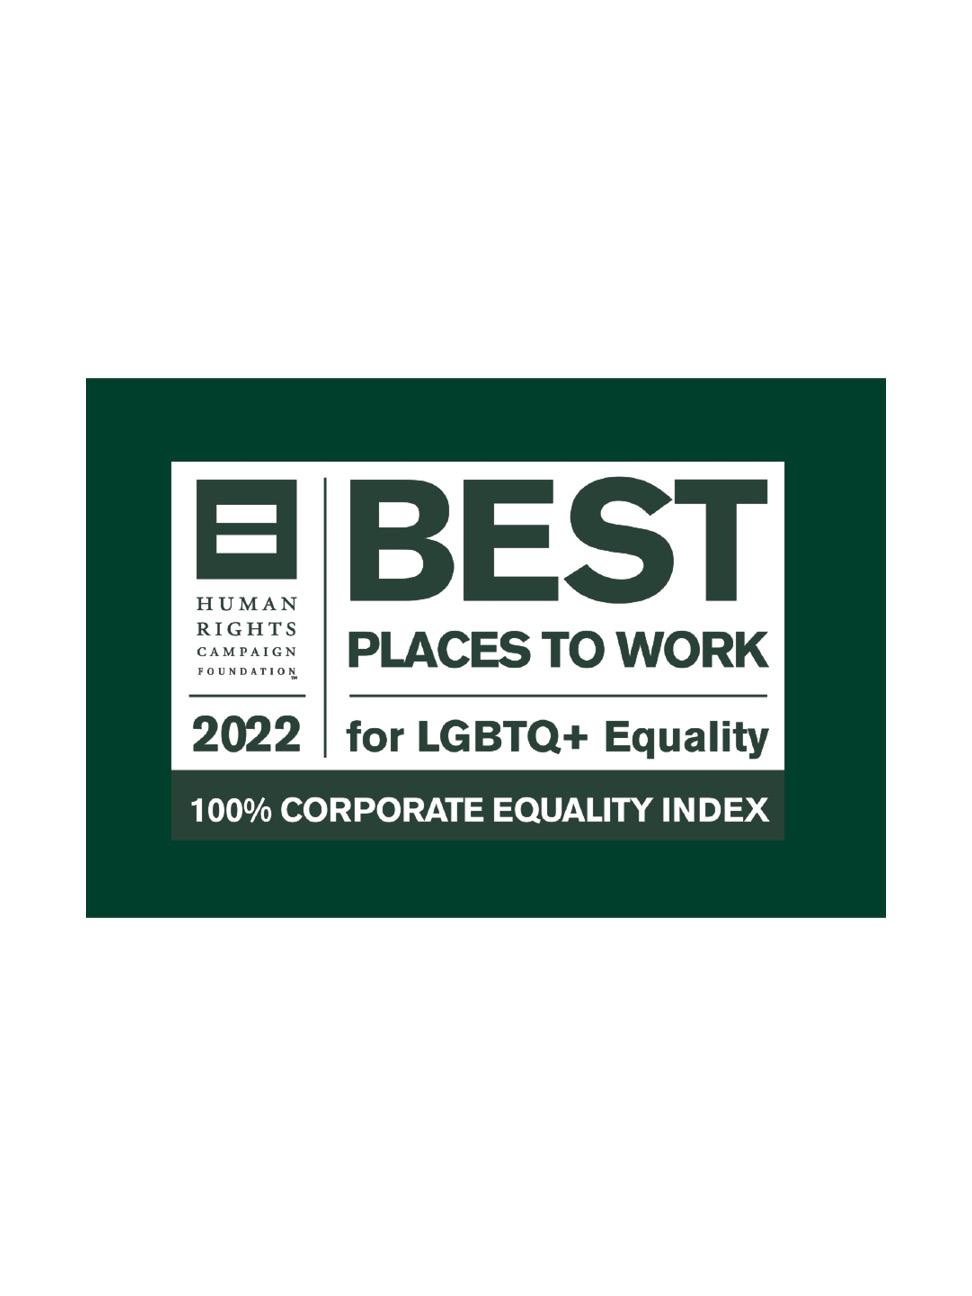 Human Rights Campaign’s 2022 Best Places to Work for LGBTQ+ Equality award logo